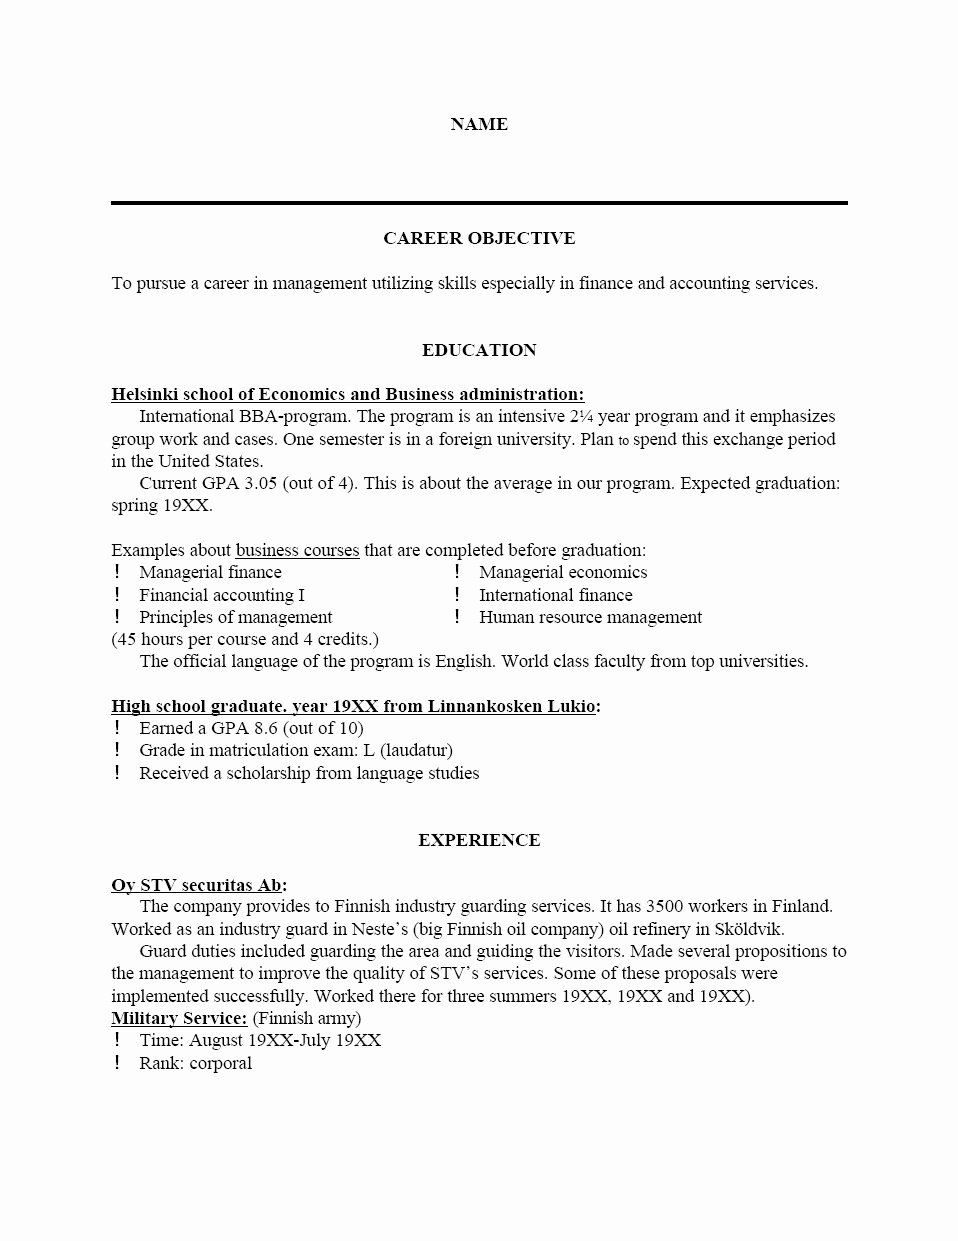 Degree In Progress Resume Best Of Free Sample Resume Template Cover Letter and Resume